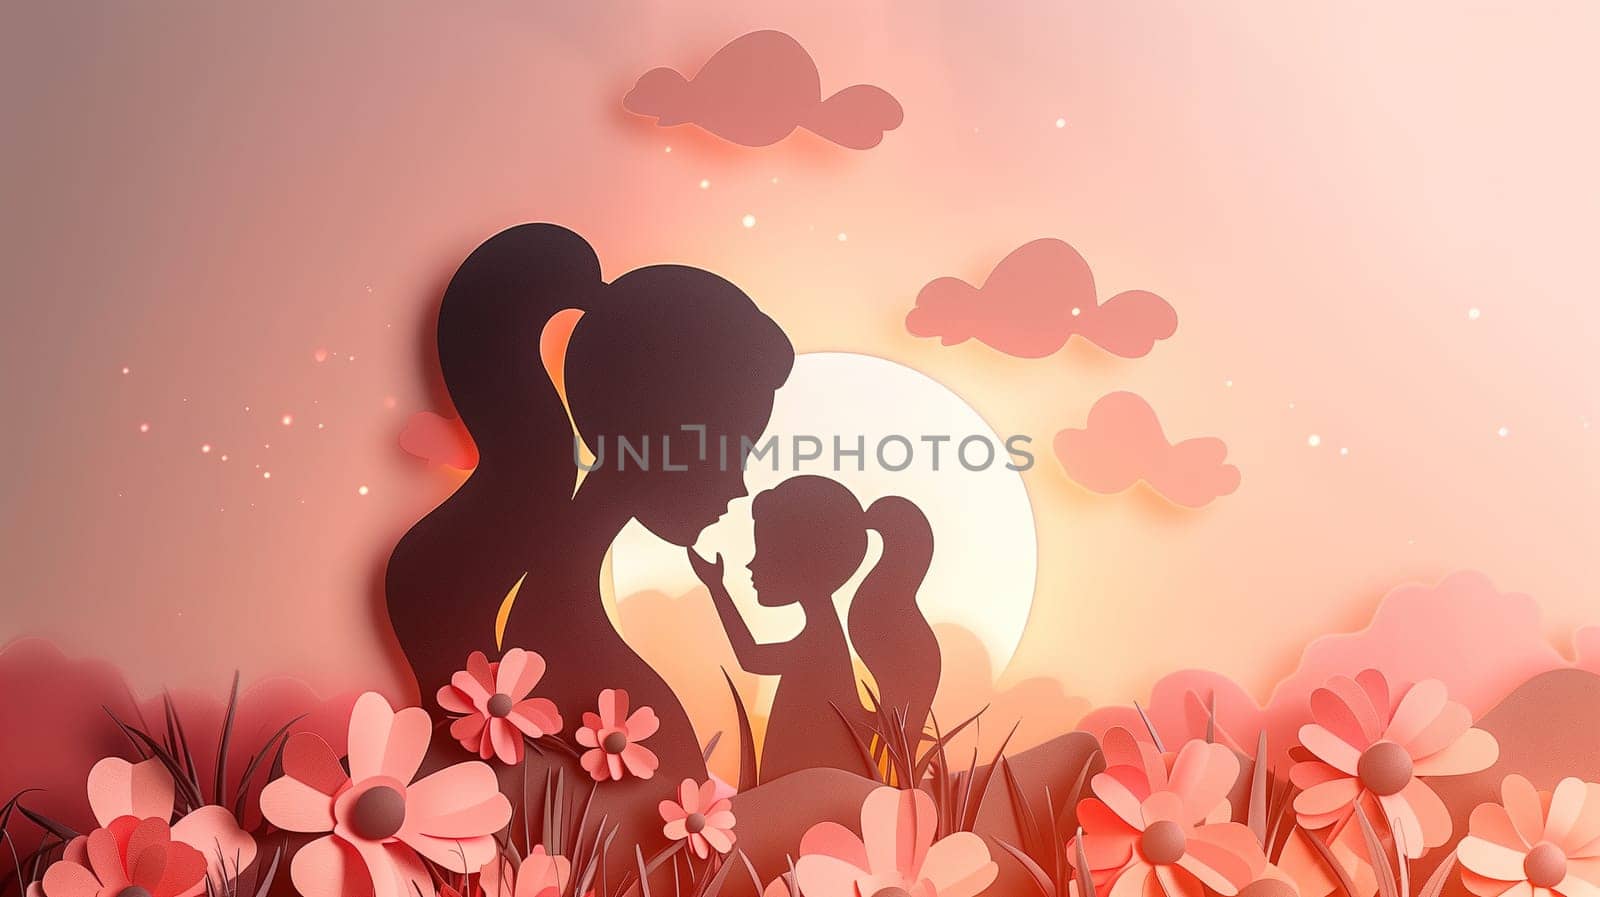 A silhouette of a mother and her child standing amidst a beautiful field of vibrant flowers, with the sun setting in the background. The mother gently holds the childs hand as they enjoy a peaceful moment together in nature.